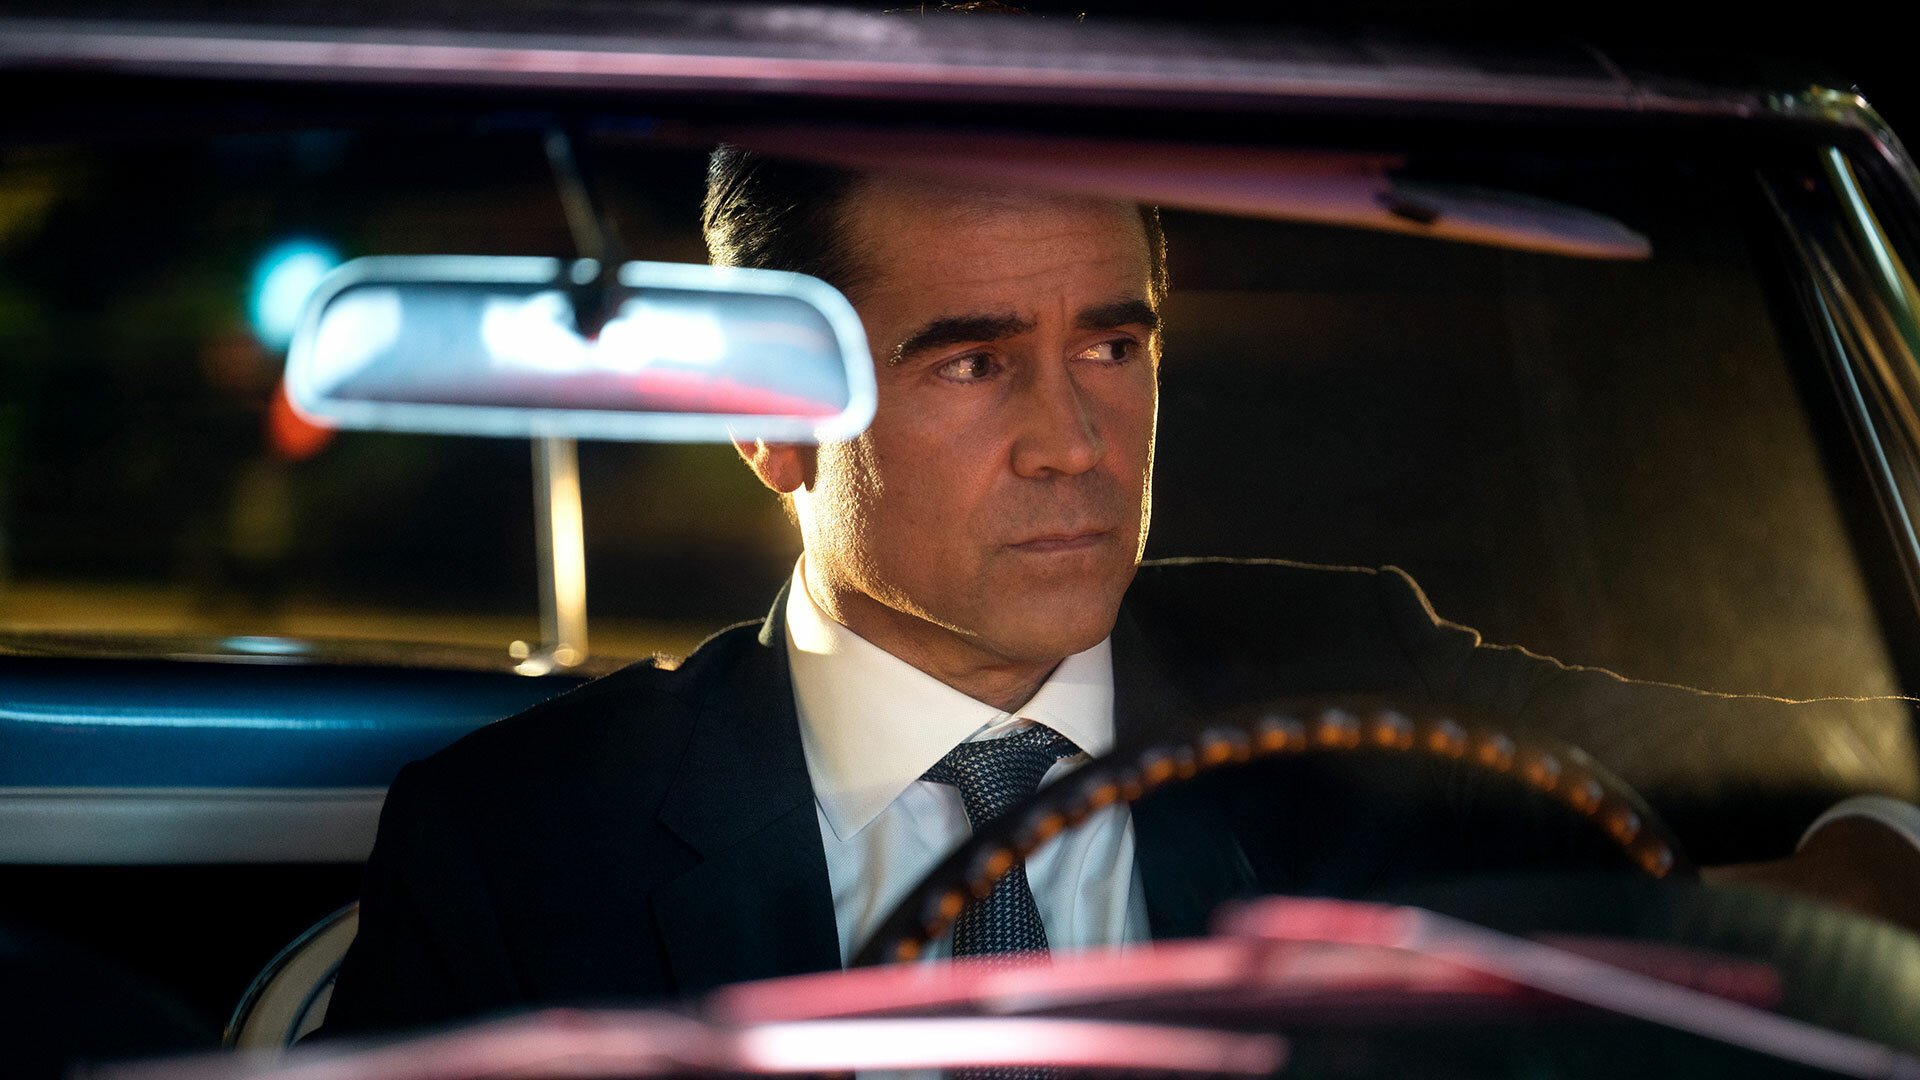 A man in a suit drives in an open top car at night.